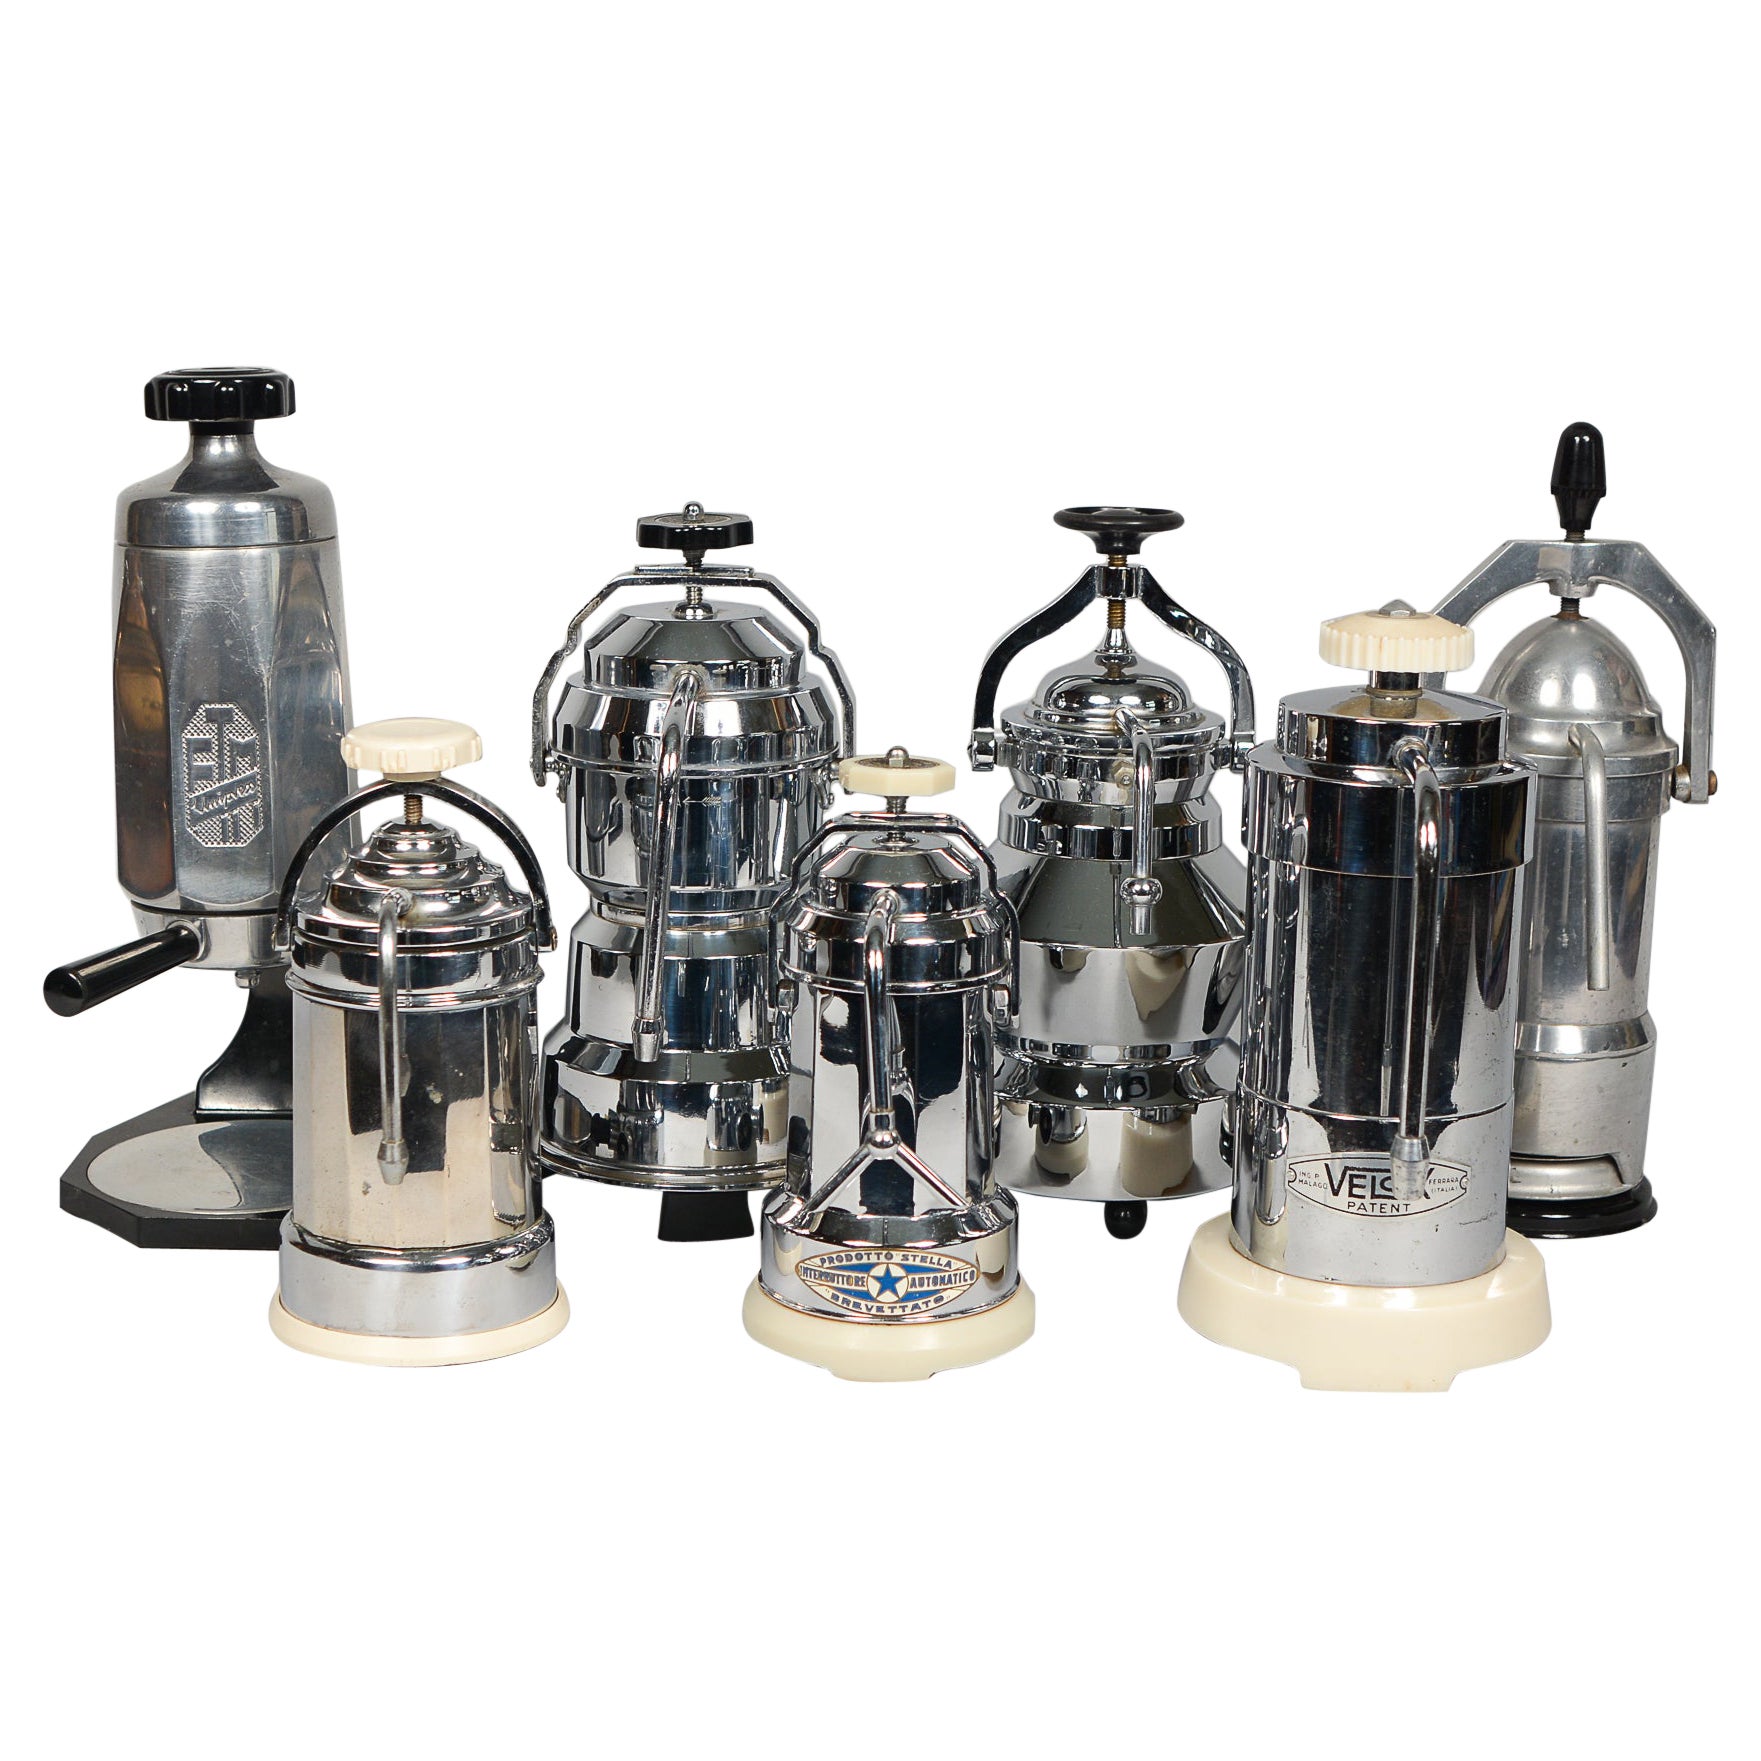 Collection of Vintage Espresso Makers in Chrome and Aluminum